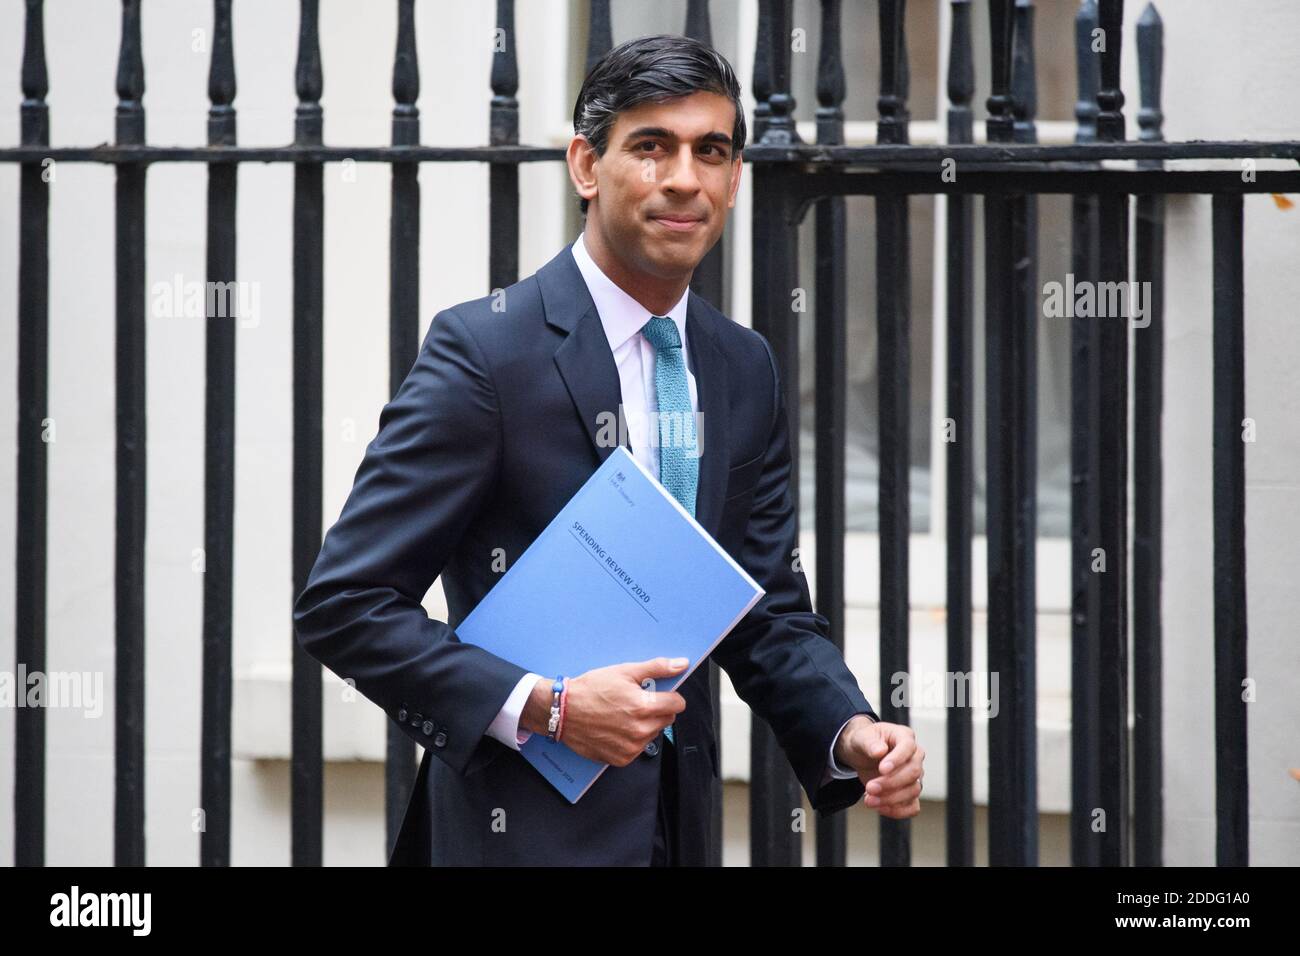 Downing Street, London, UK. 25th Nov 2020. Chancellor of the Exchequer Rishi Sunak leaves 11 Downing Street, London, ahead of delivering his one-year Spending Review in the House of Commons. Picture date: Wednesday November 25, 2020. Photo credit should read: Matt Crossick/Empics/Alamy Live News Stock Photo